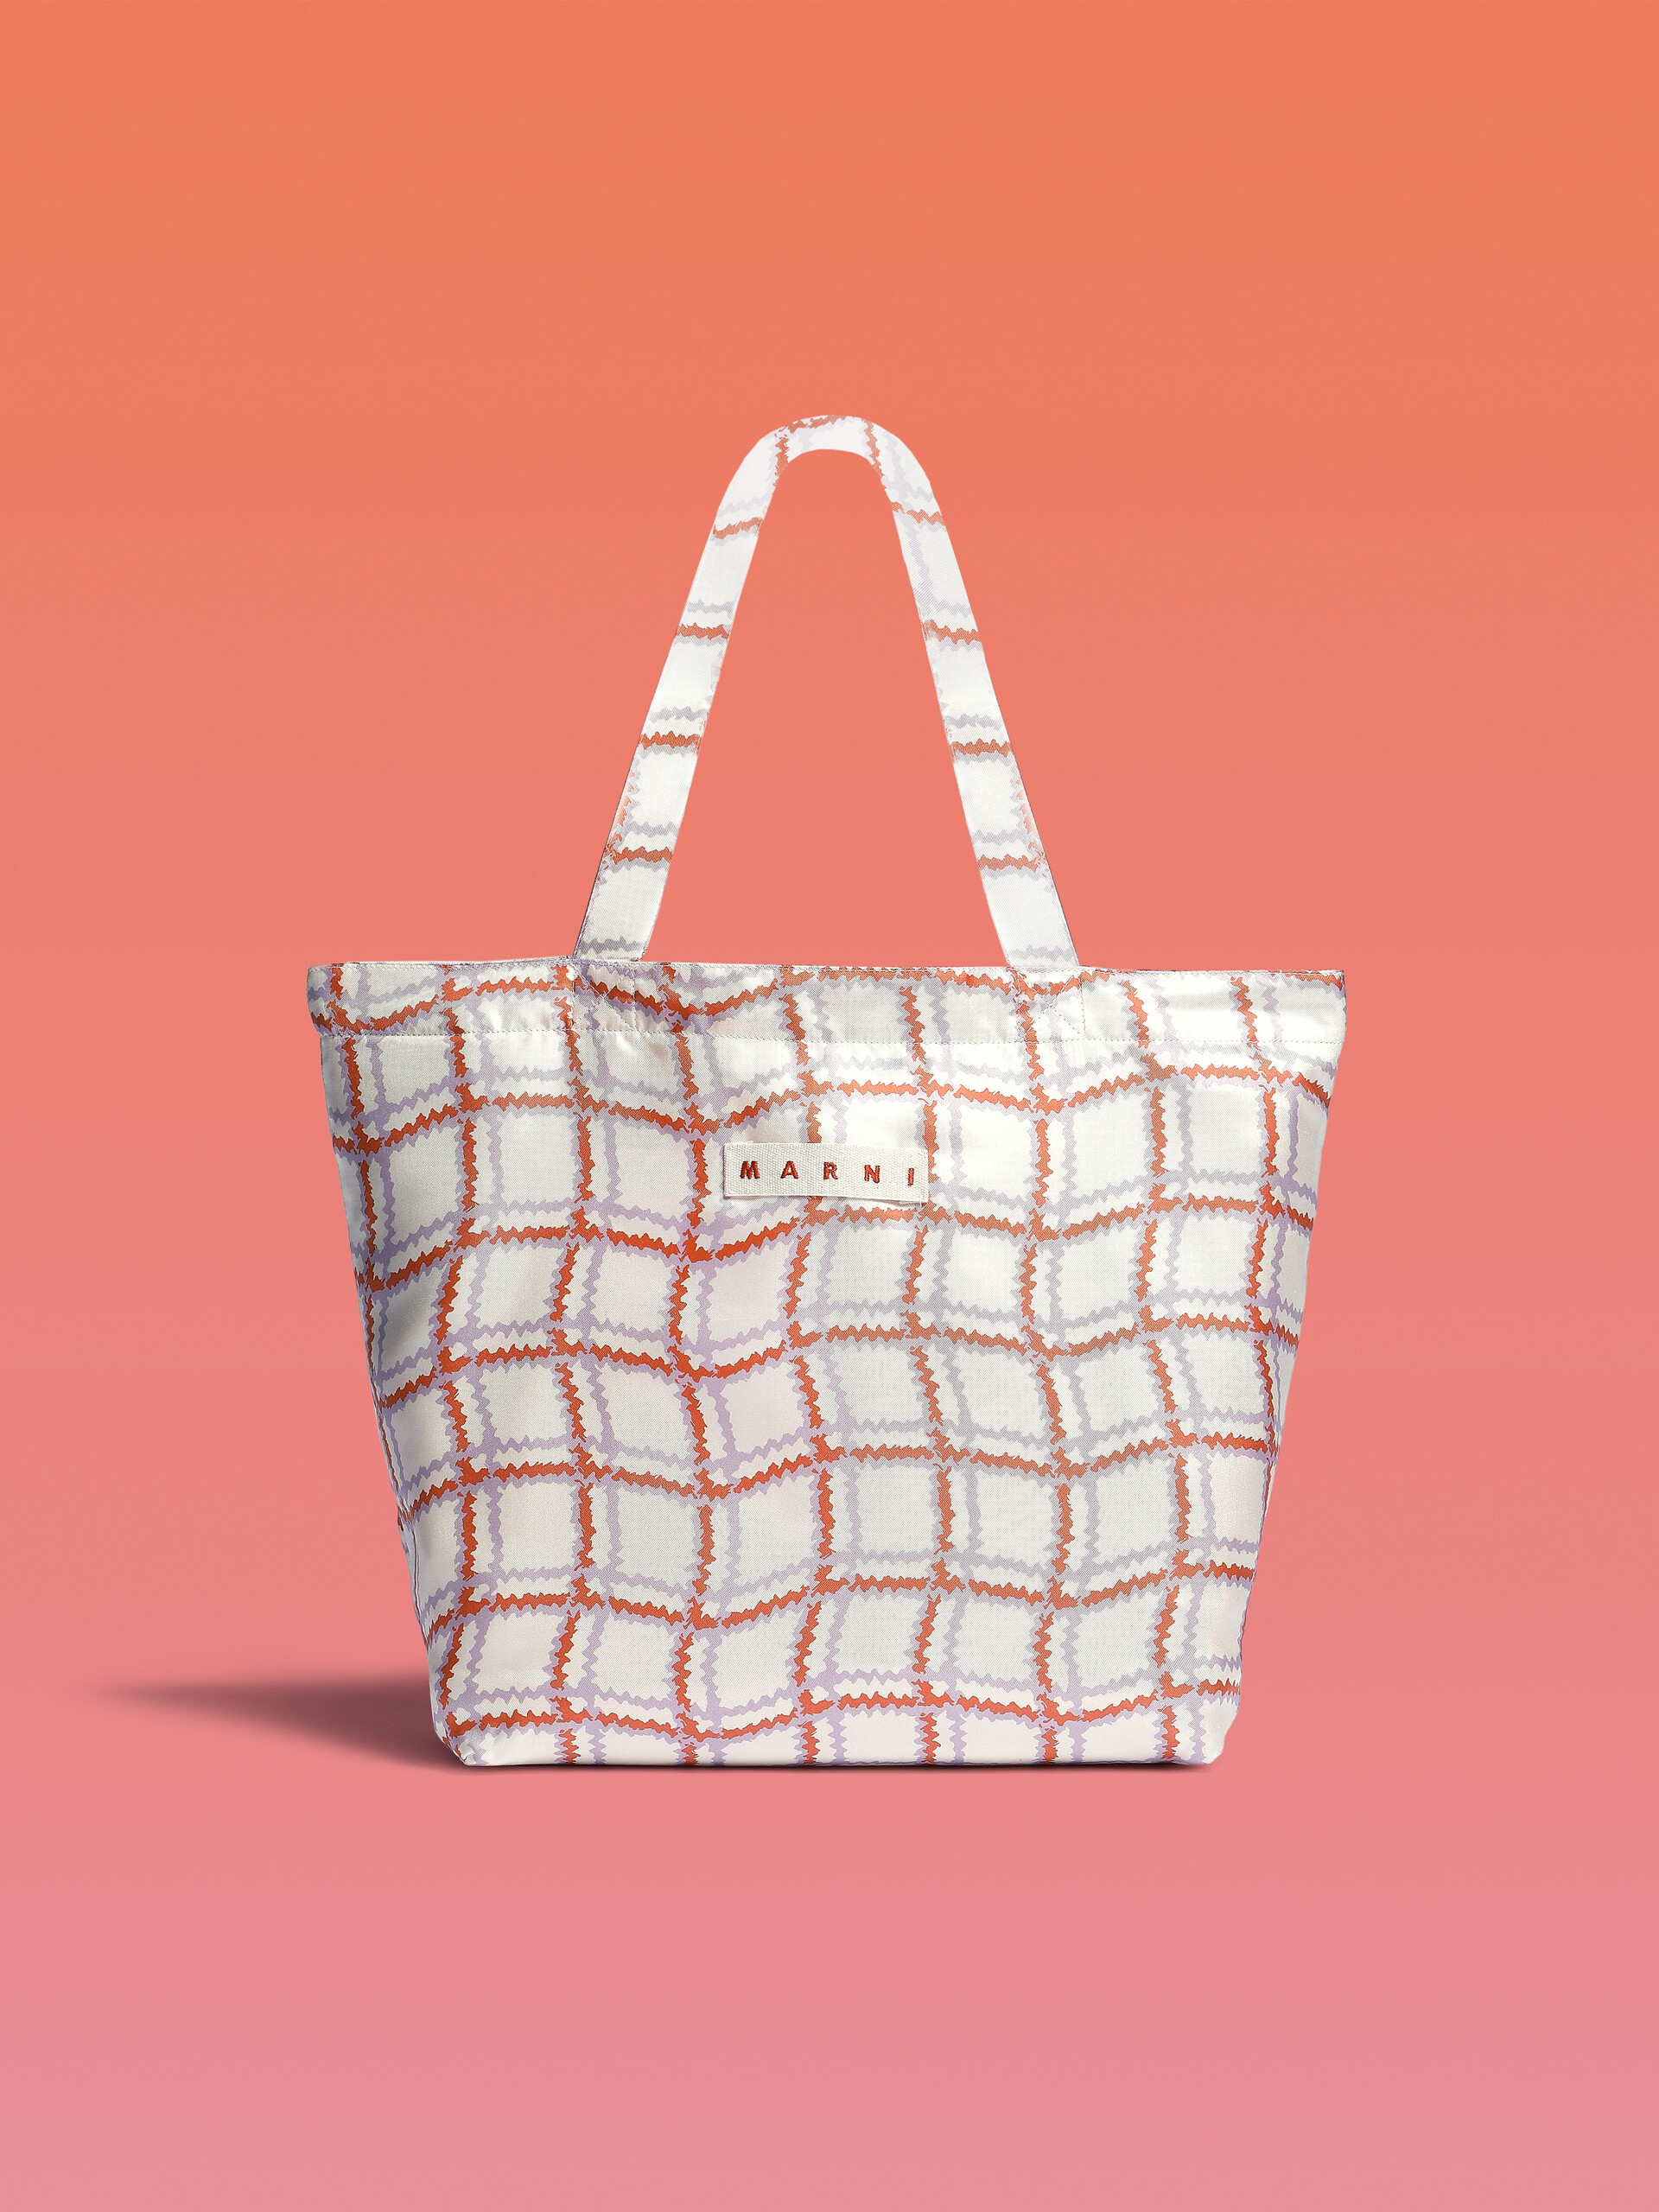 White silk tote bag with archival check print - Bags - Image 1